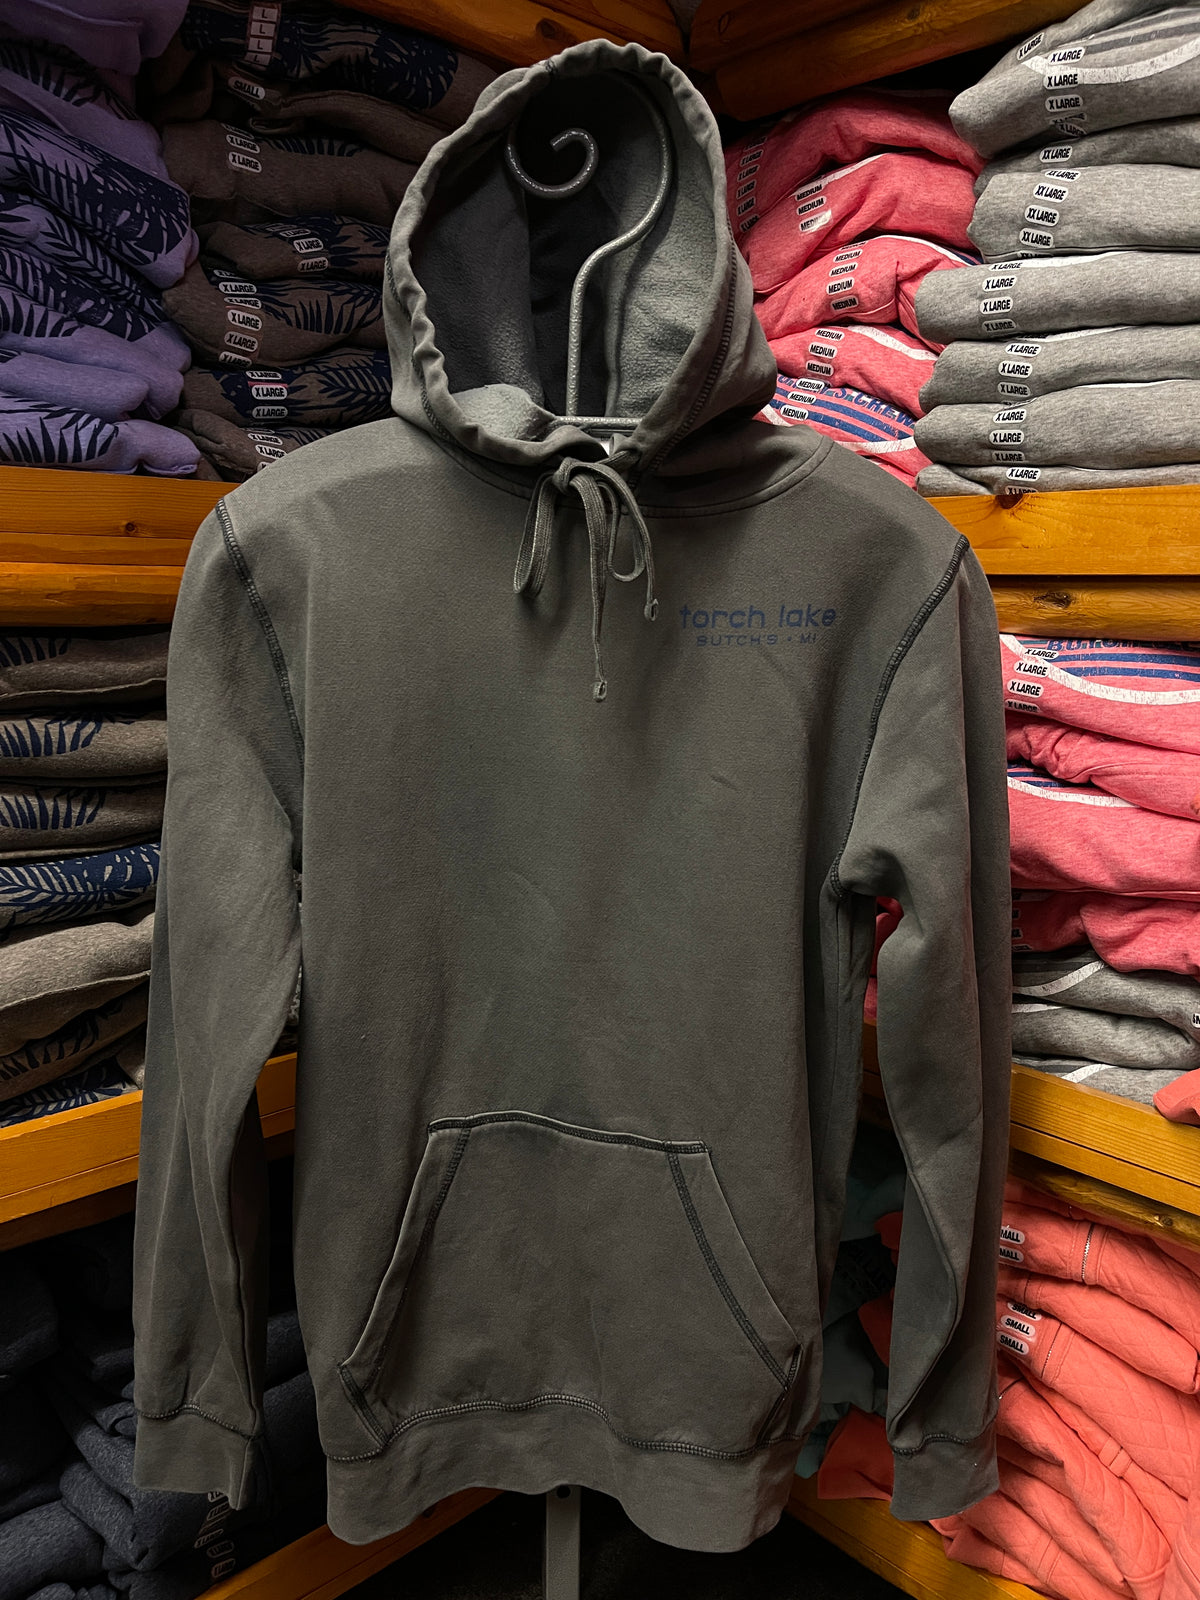 Bud Looks Good In Pink (But That Sold Out So Here It Is In Gray) Hoodie